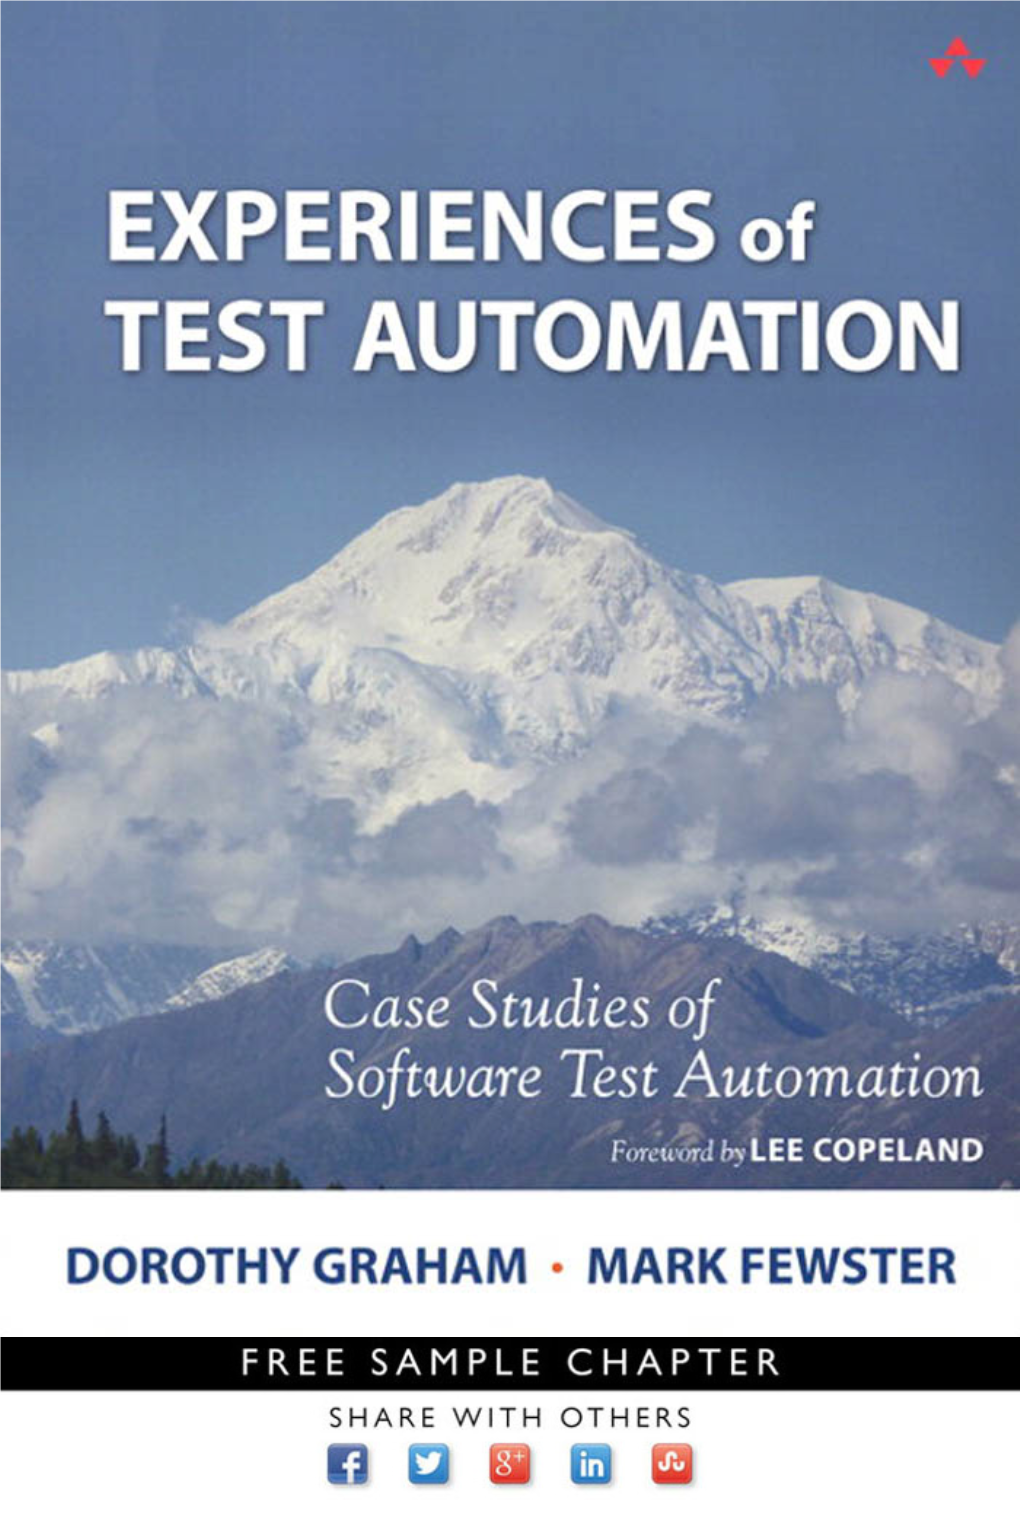 Experiences of Test Automation: Case Studies of Software Test